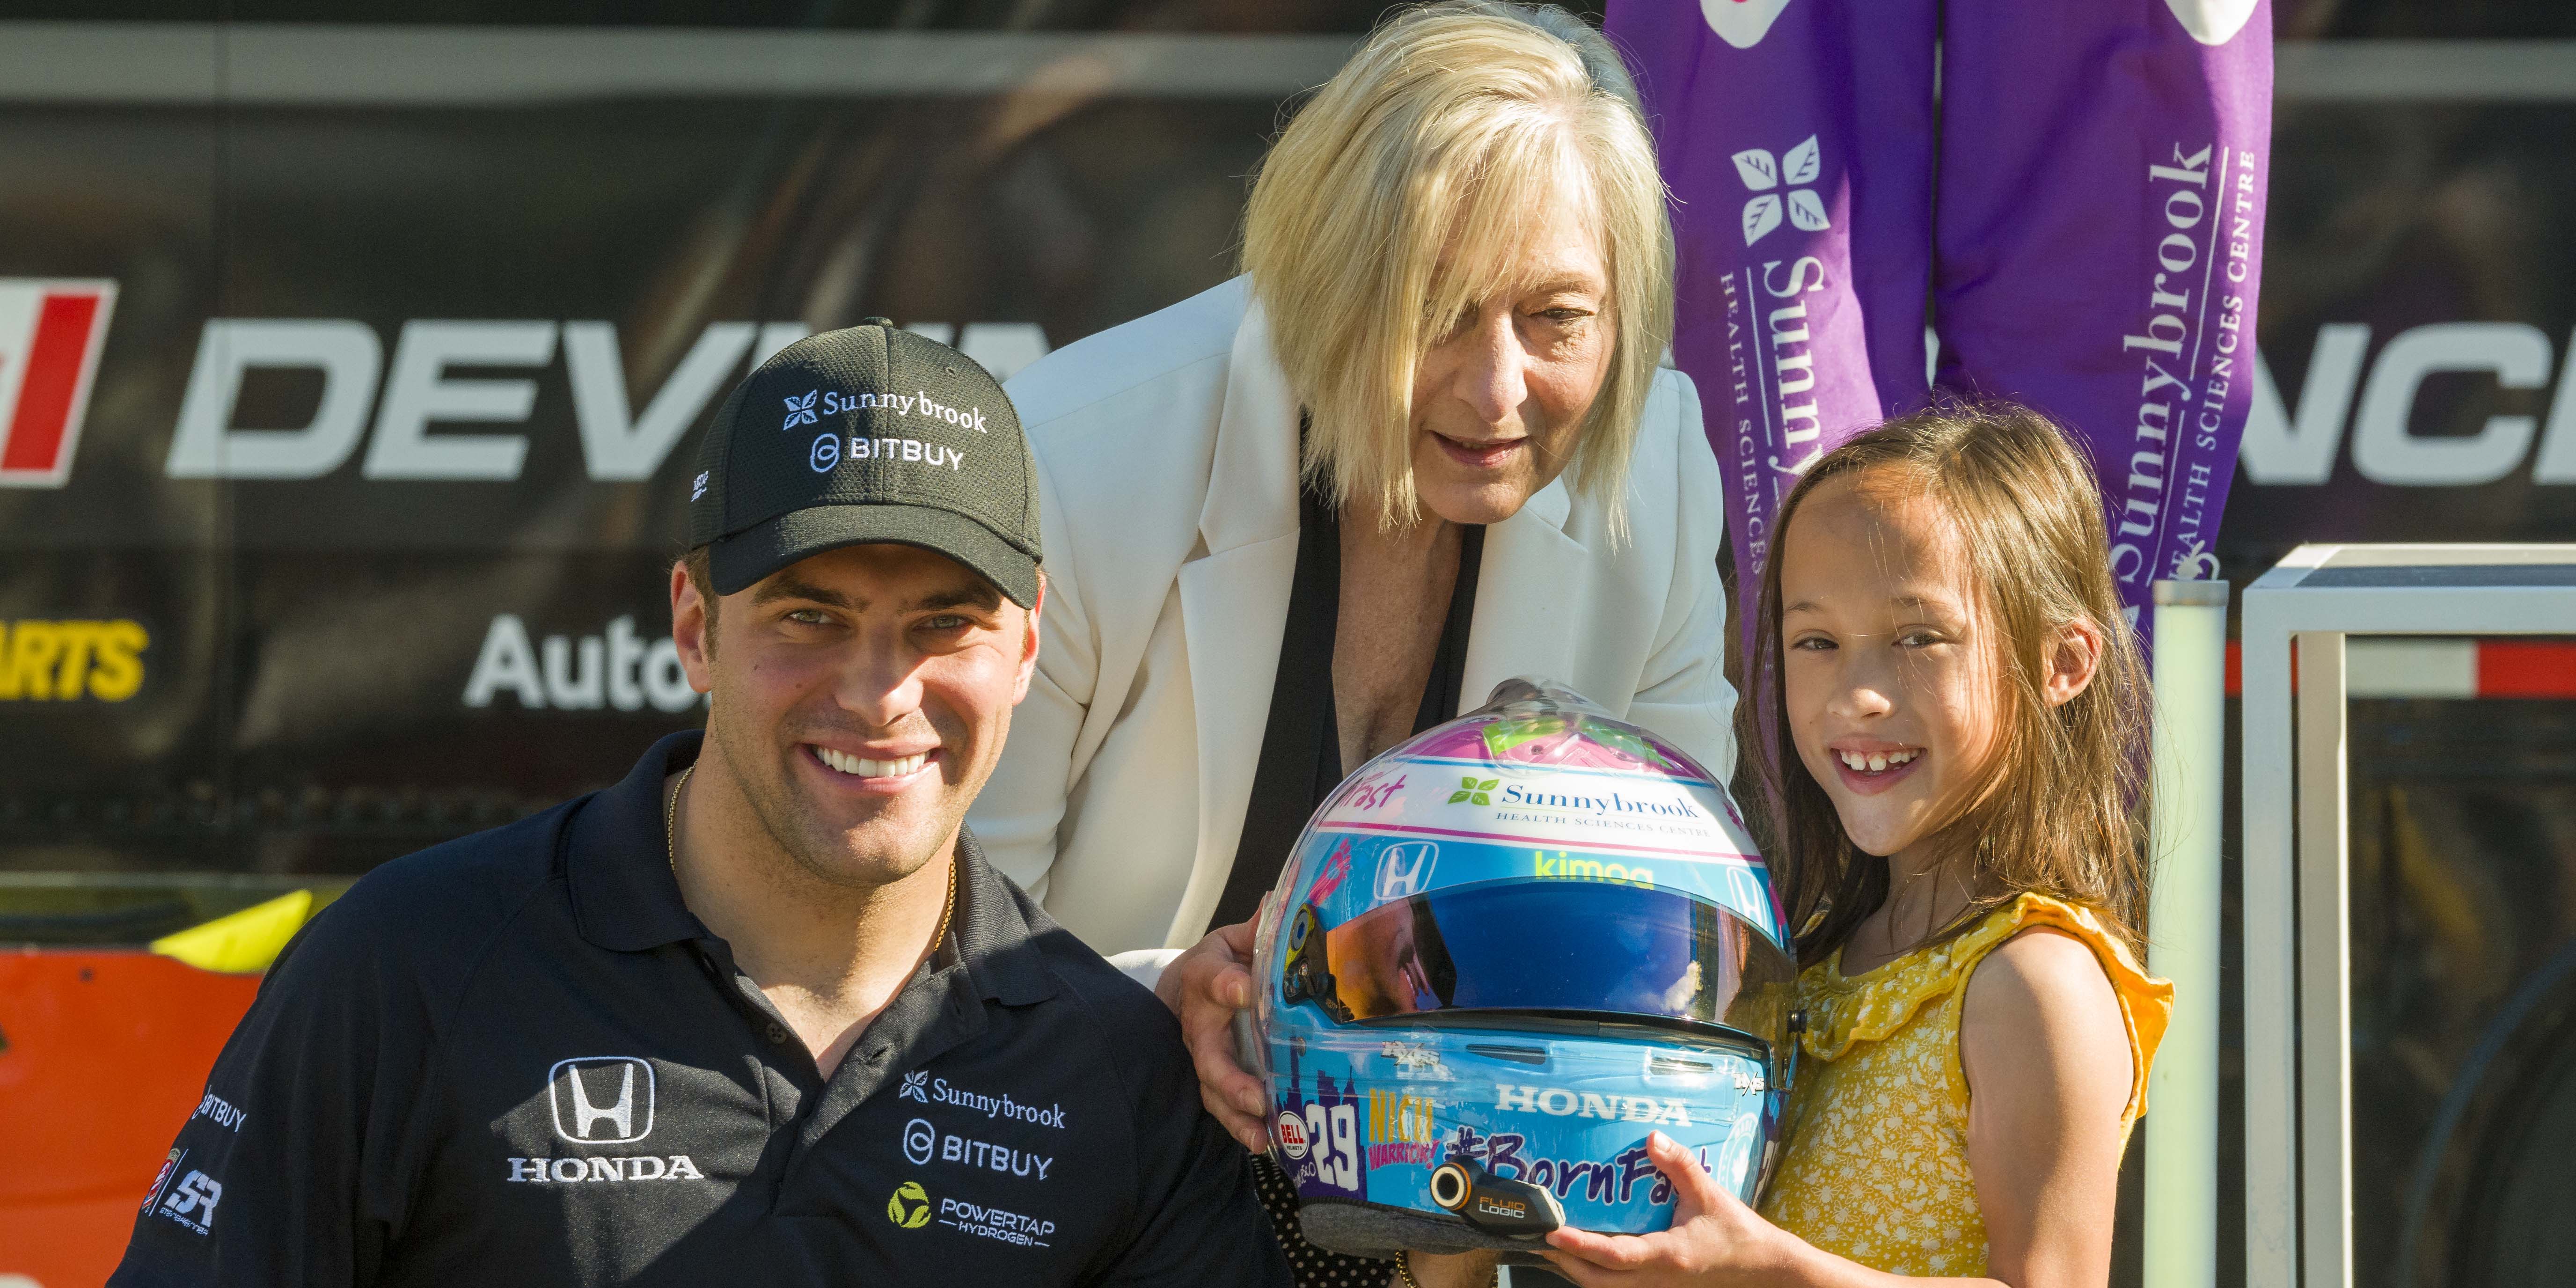 A man, woman and child pose for a photo holding a racing helmet